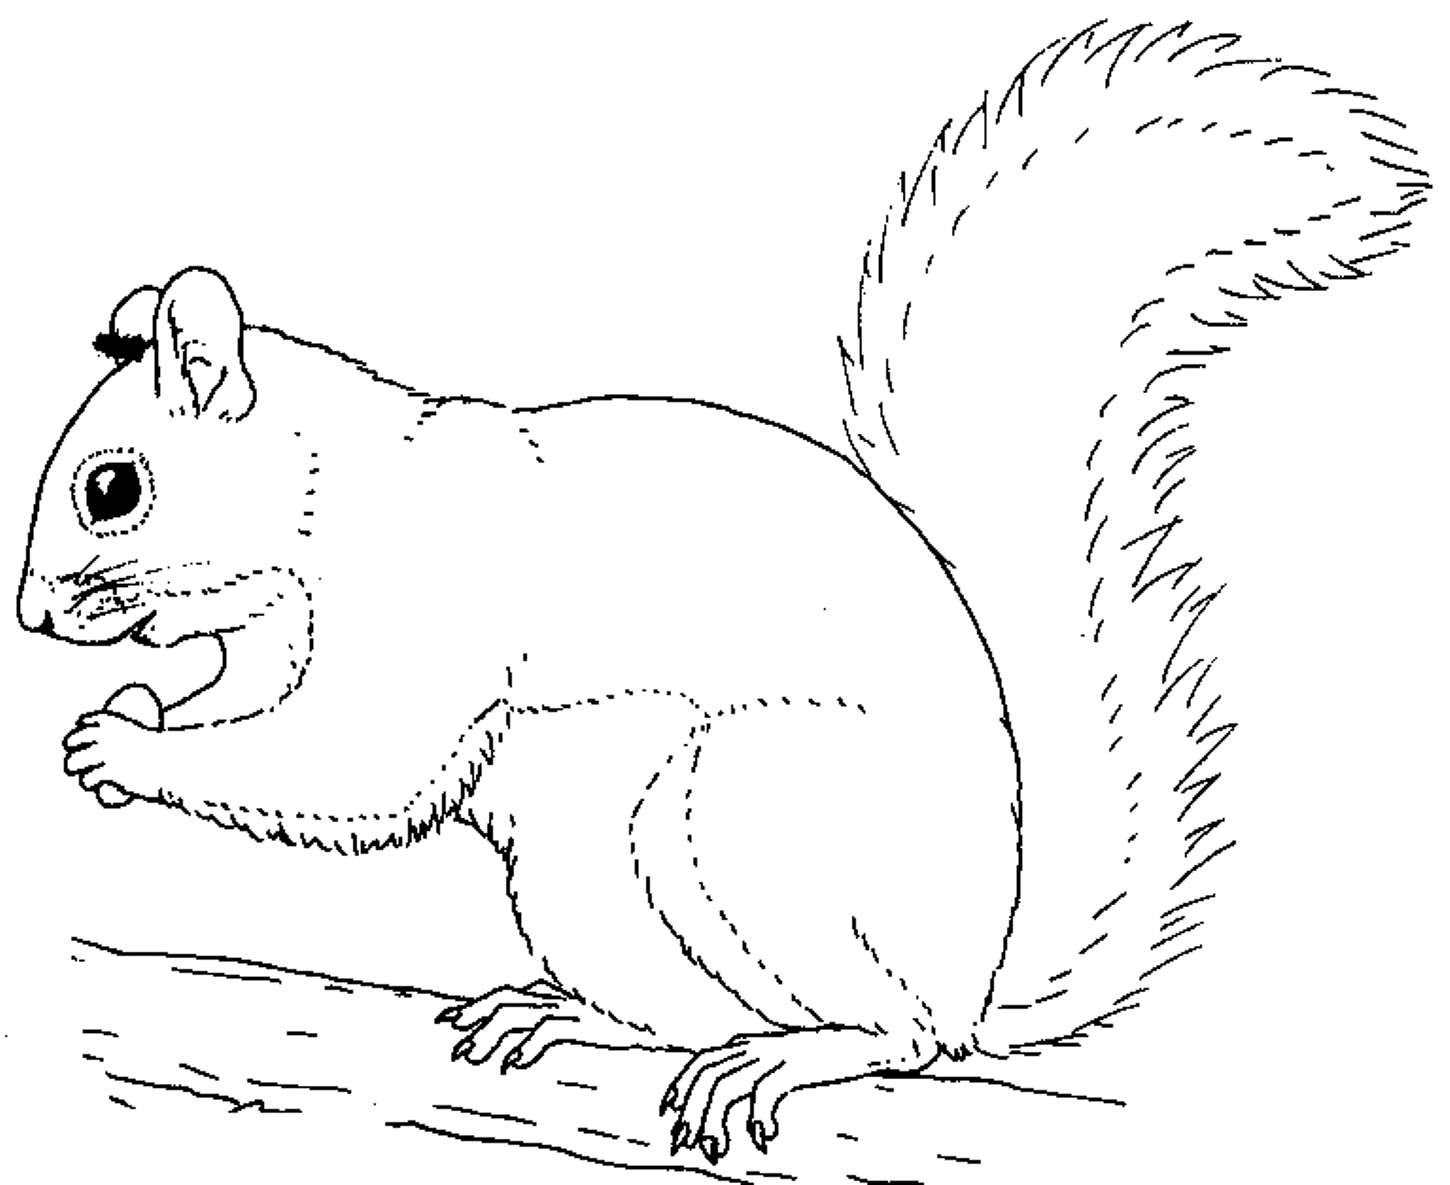 squirrel-coloring-pages-to-download-and-print-for-free